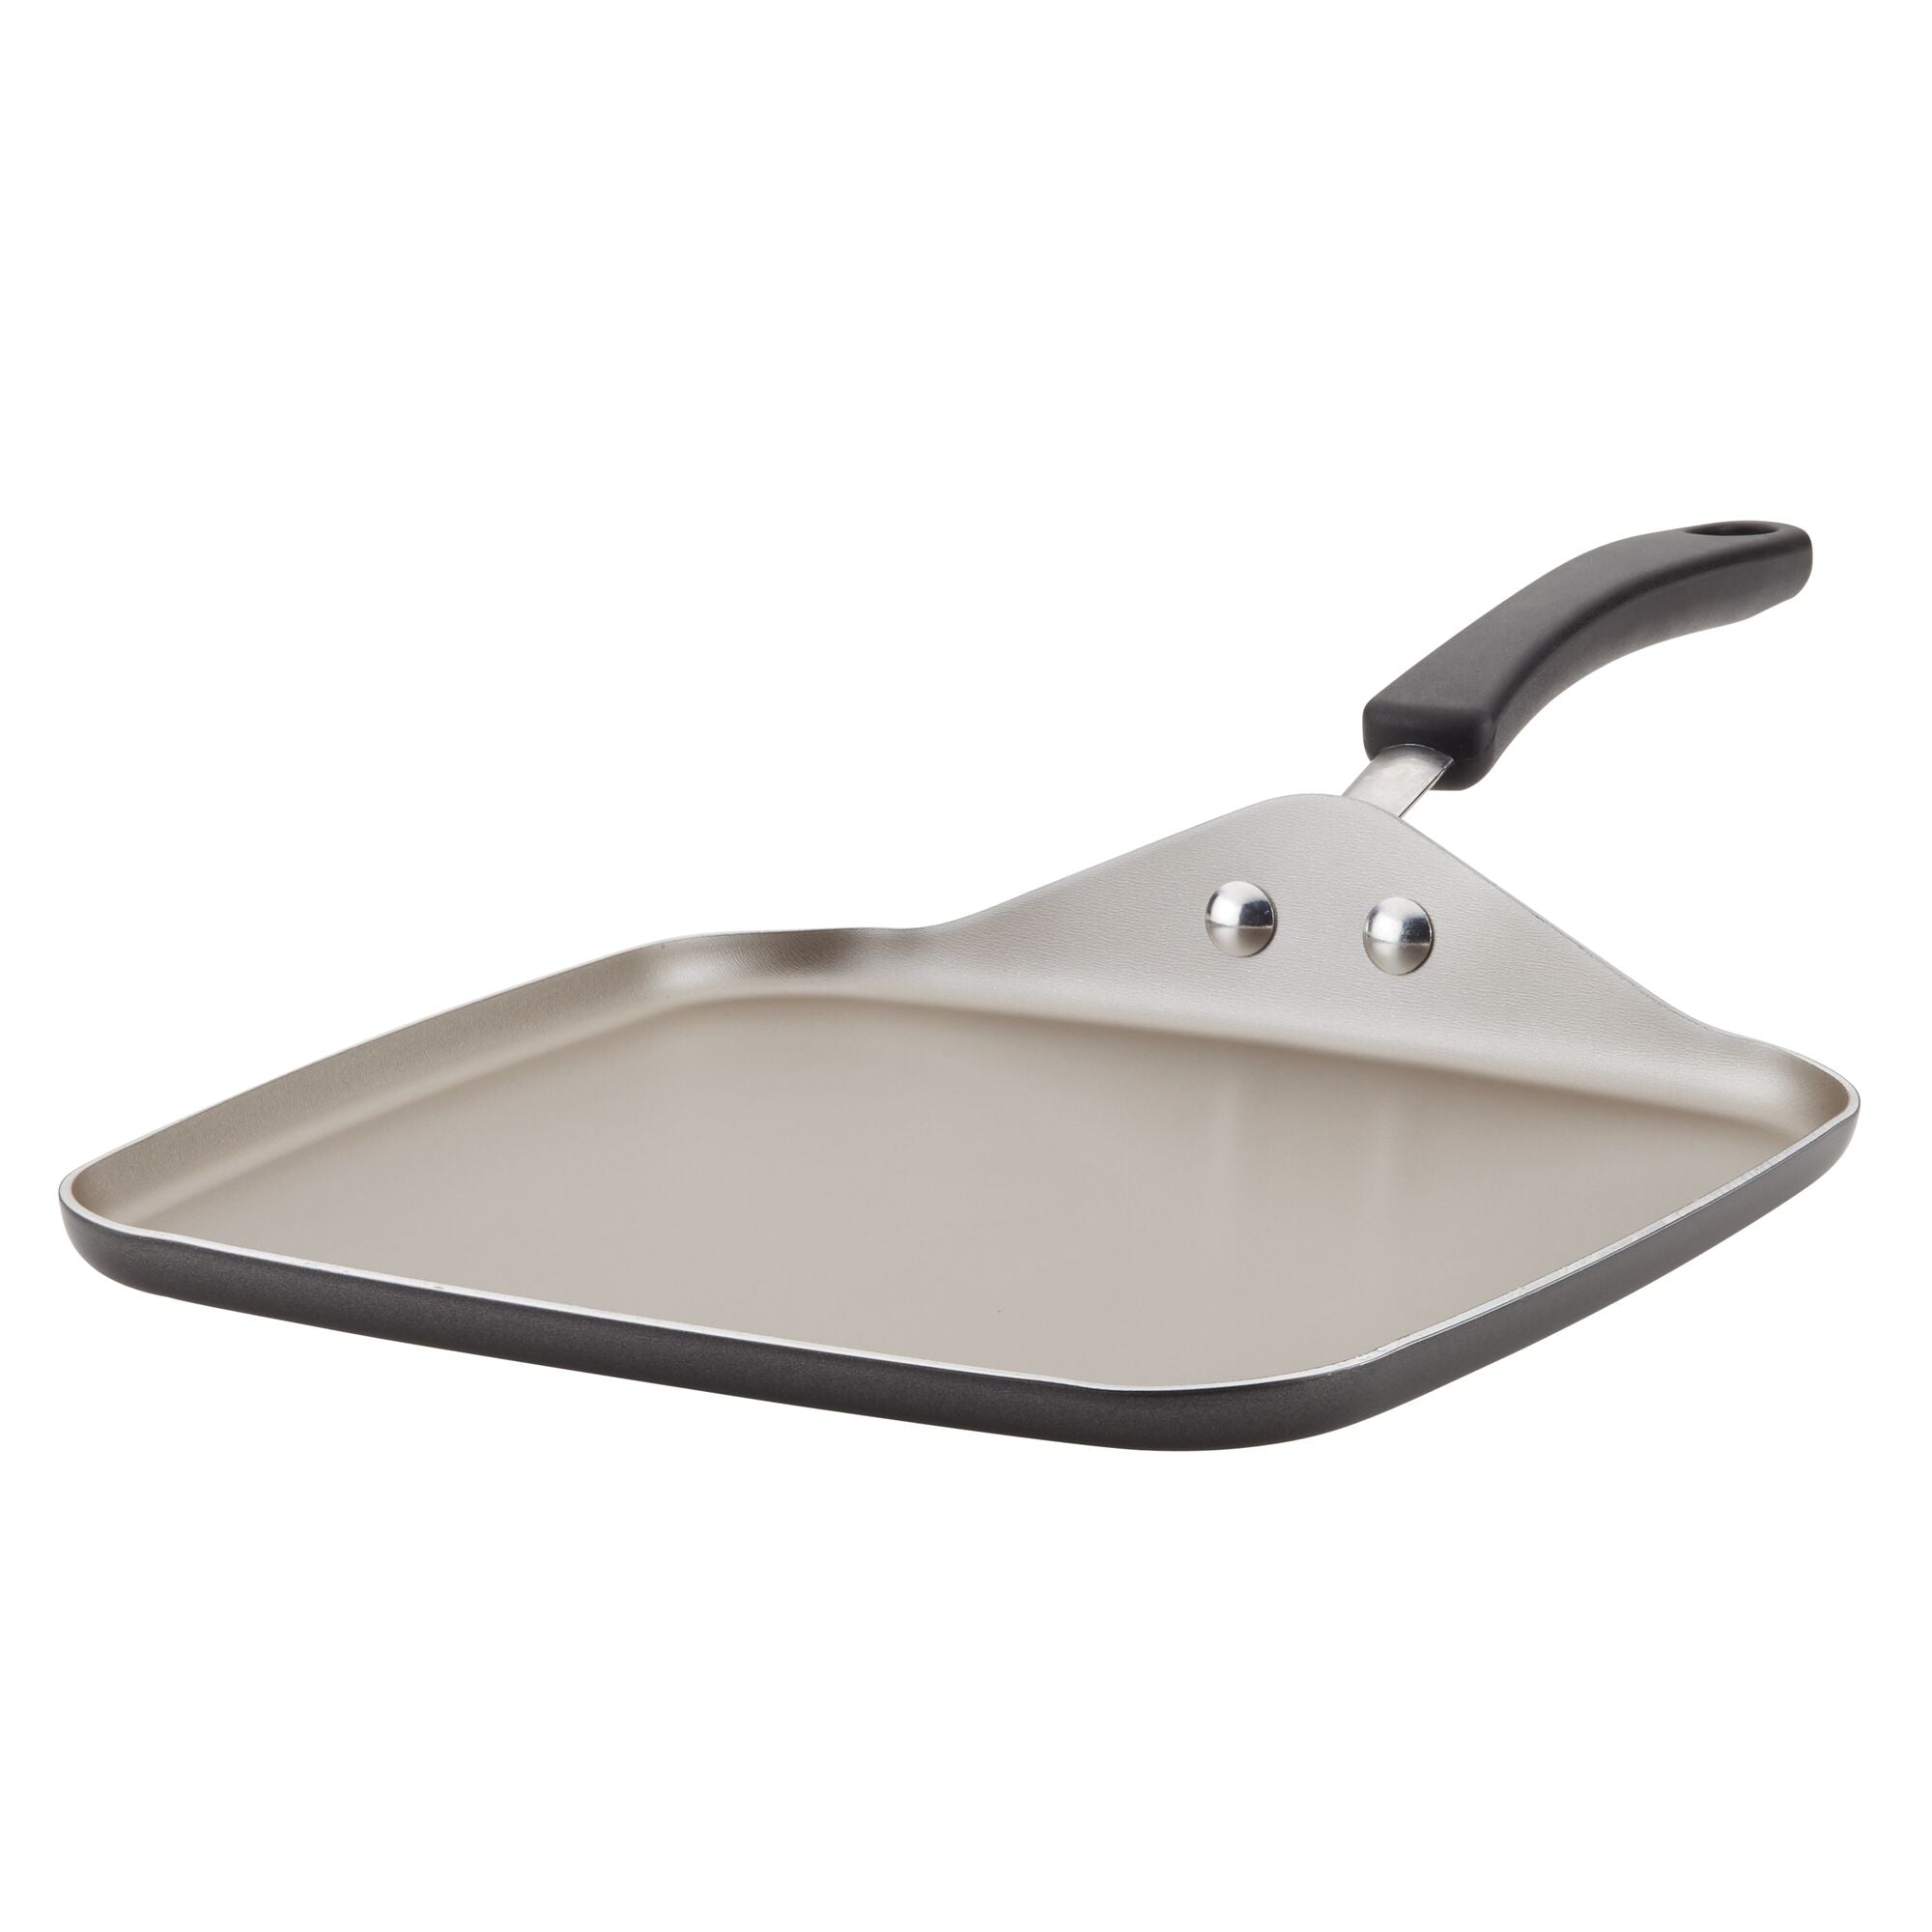 Better Chef 11 Inch Aluminum Non-stick Square Griddle In Black : Target